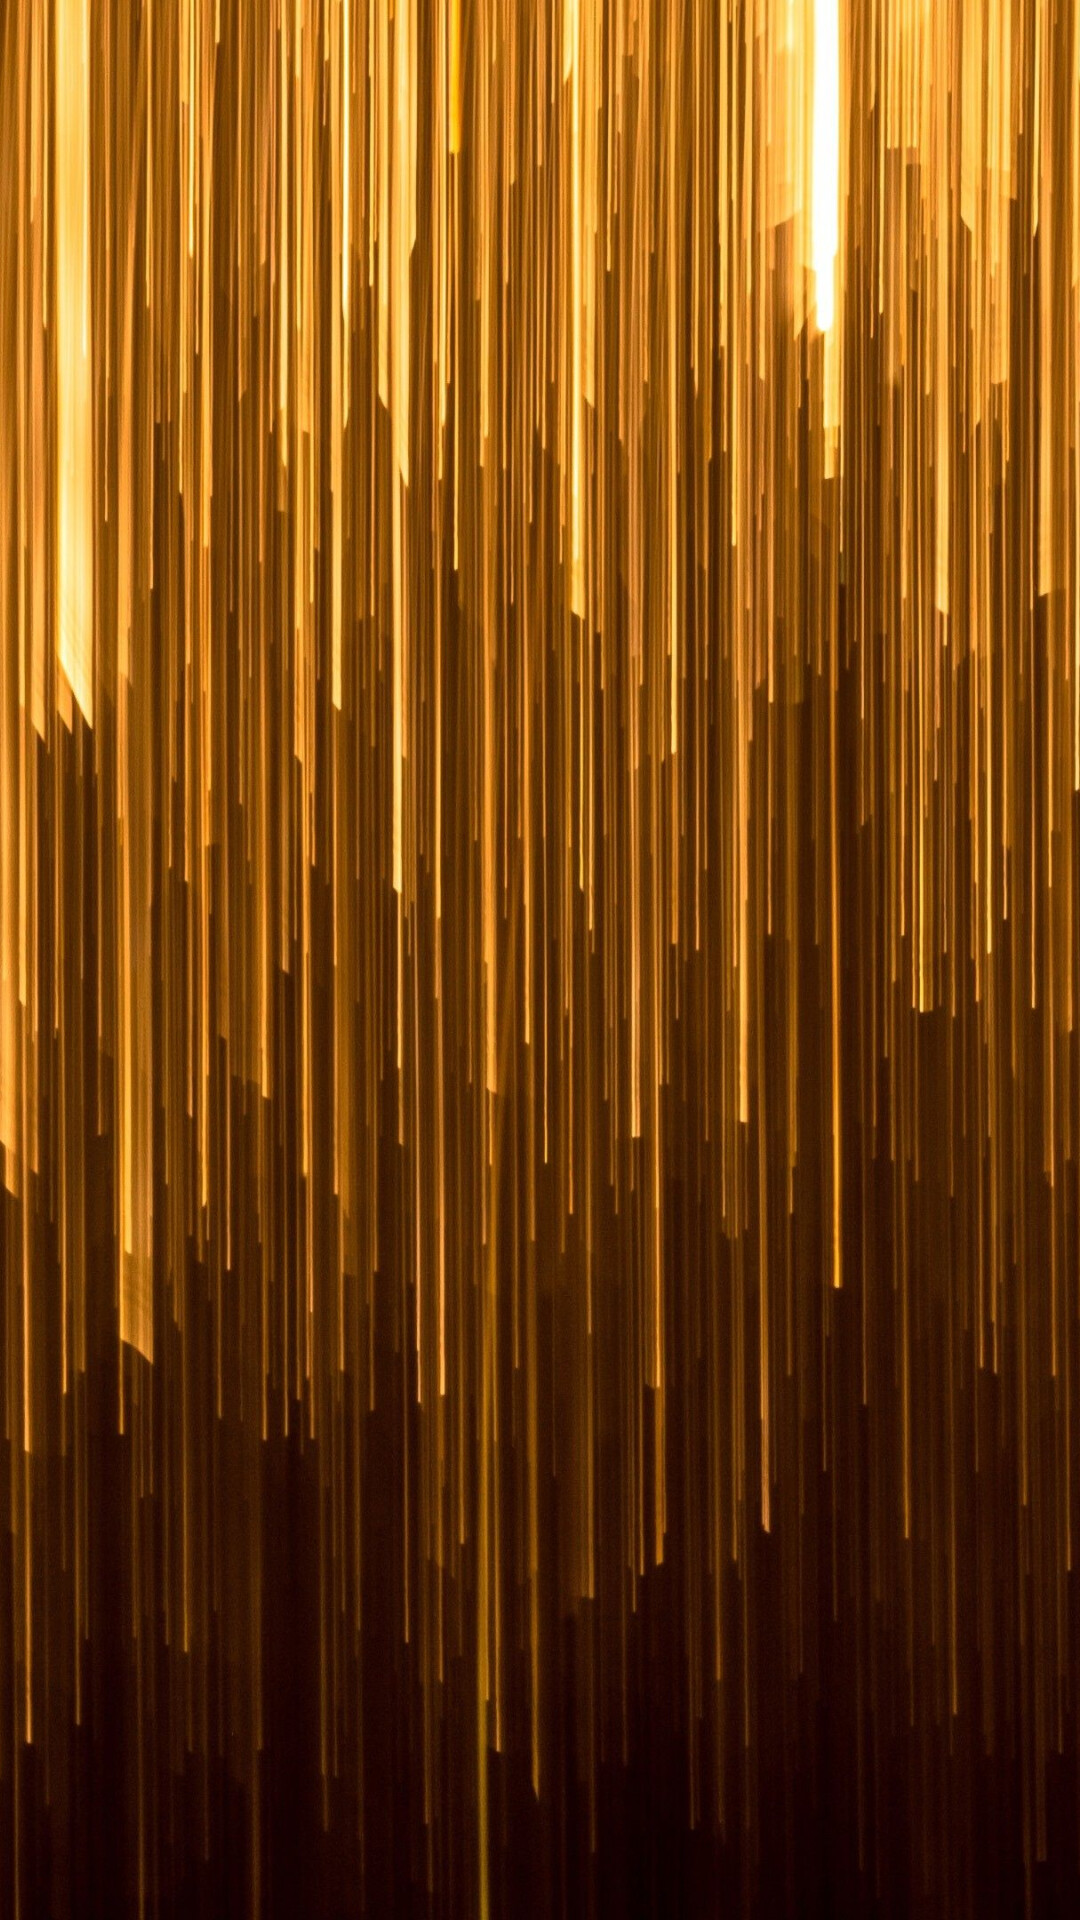 Gold Lights: Shining golden threads, Blossom of gold, Tints and shades, Decorative holiday lights. 1080x1920 Full HD Wallpaper.